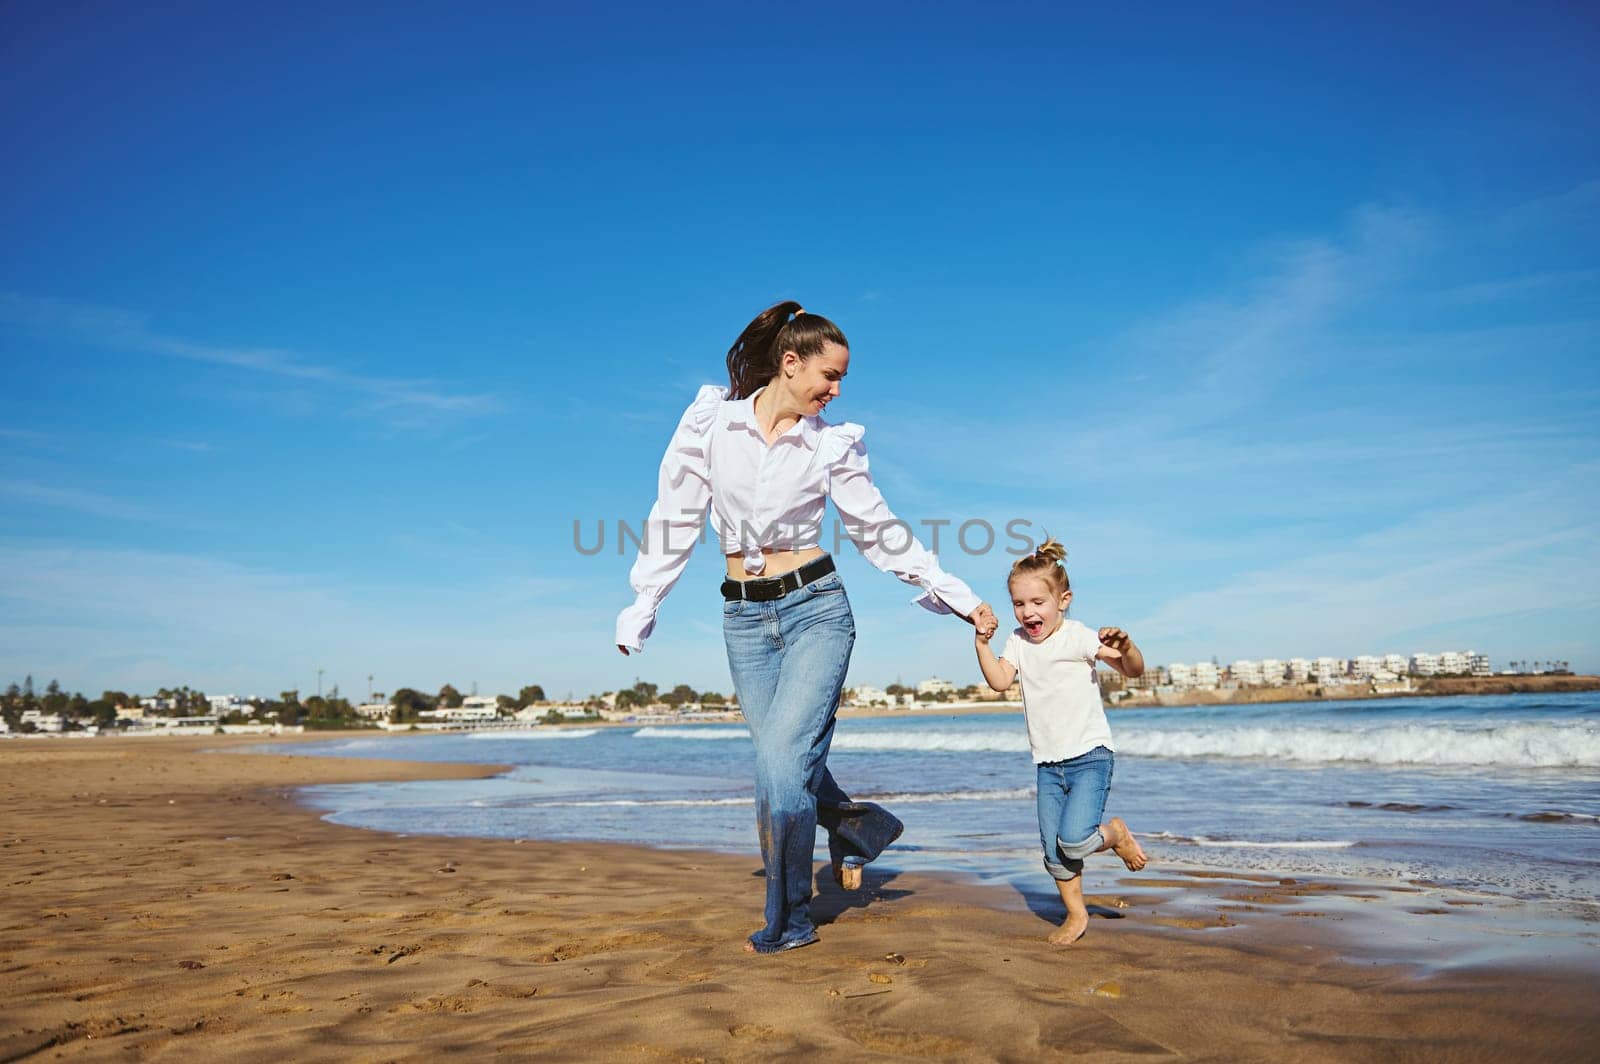 Cheerful young woman, mother and her daughter running barefoot on warm water on waves, playing together, spending happy nice time. Family relationships. People. Lifestyle. Leisure activity